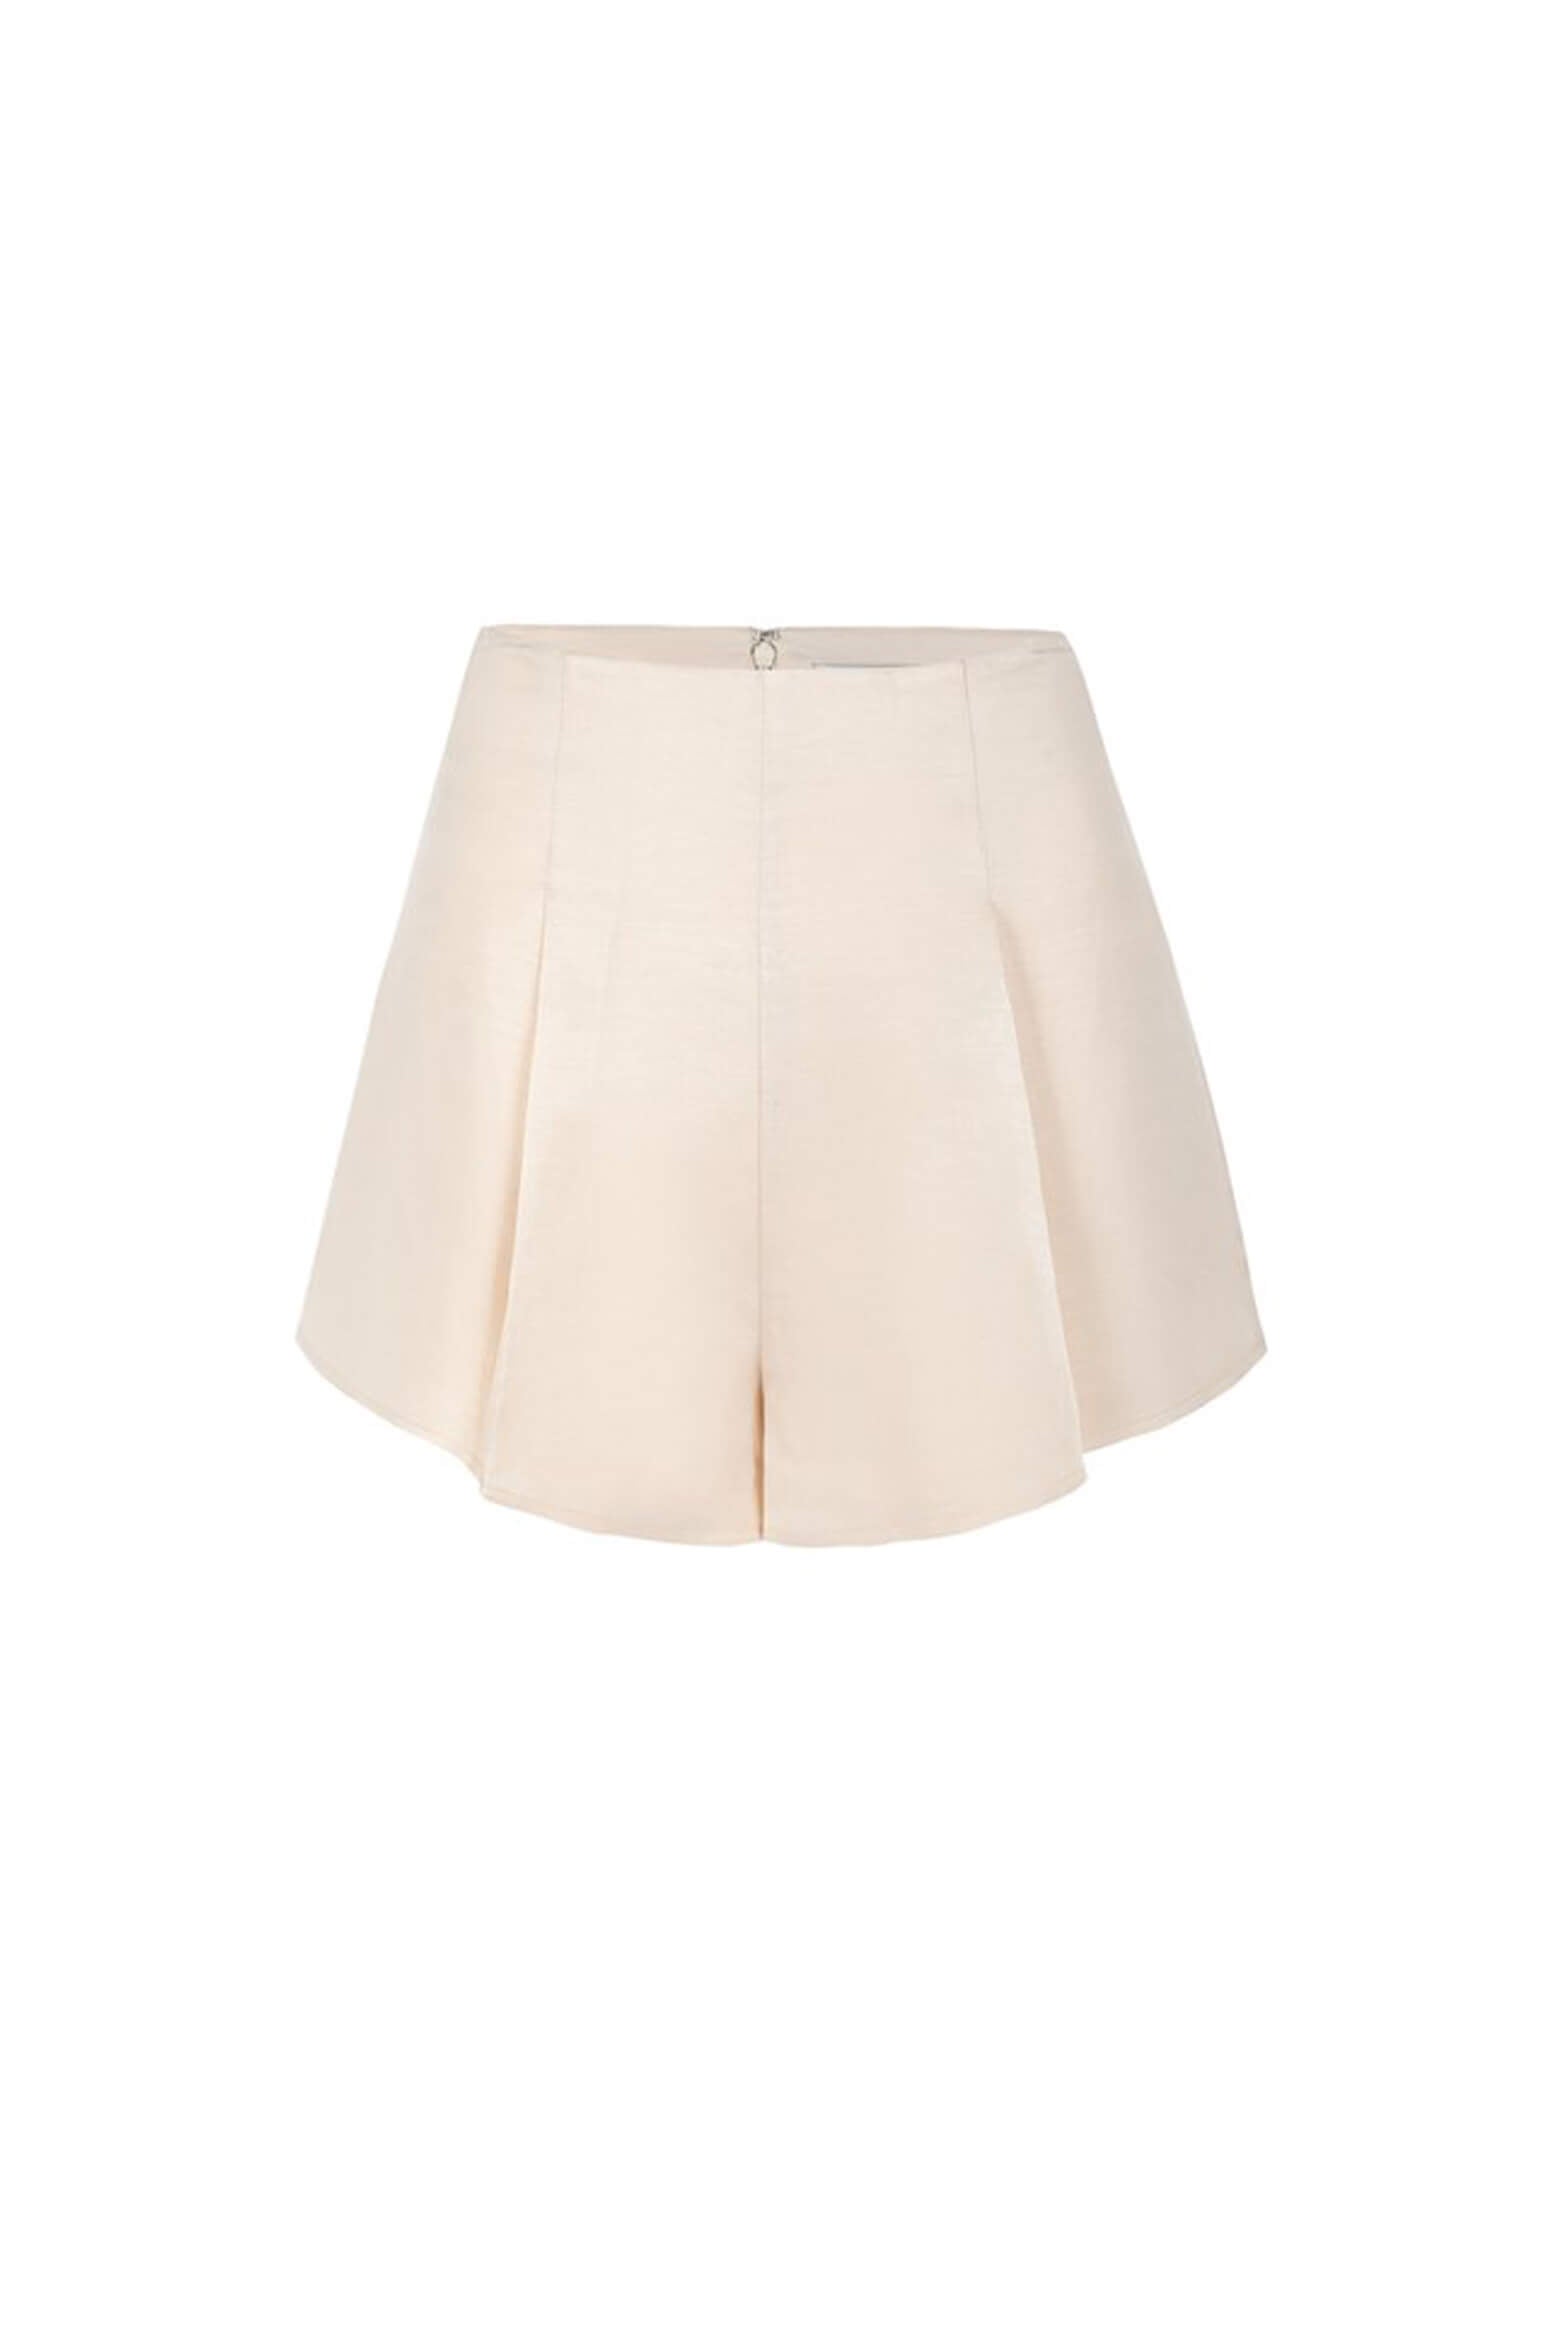 Auteur Studio Heather Shorts in Cream from The New Trend